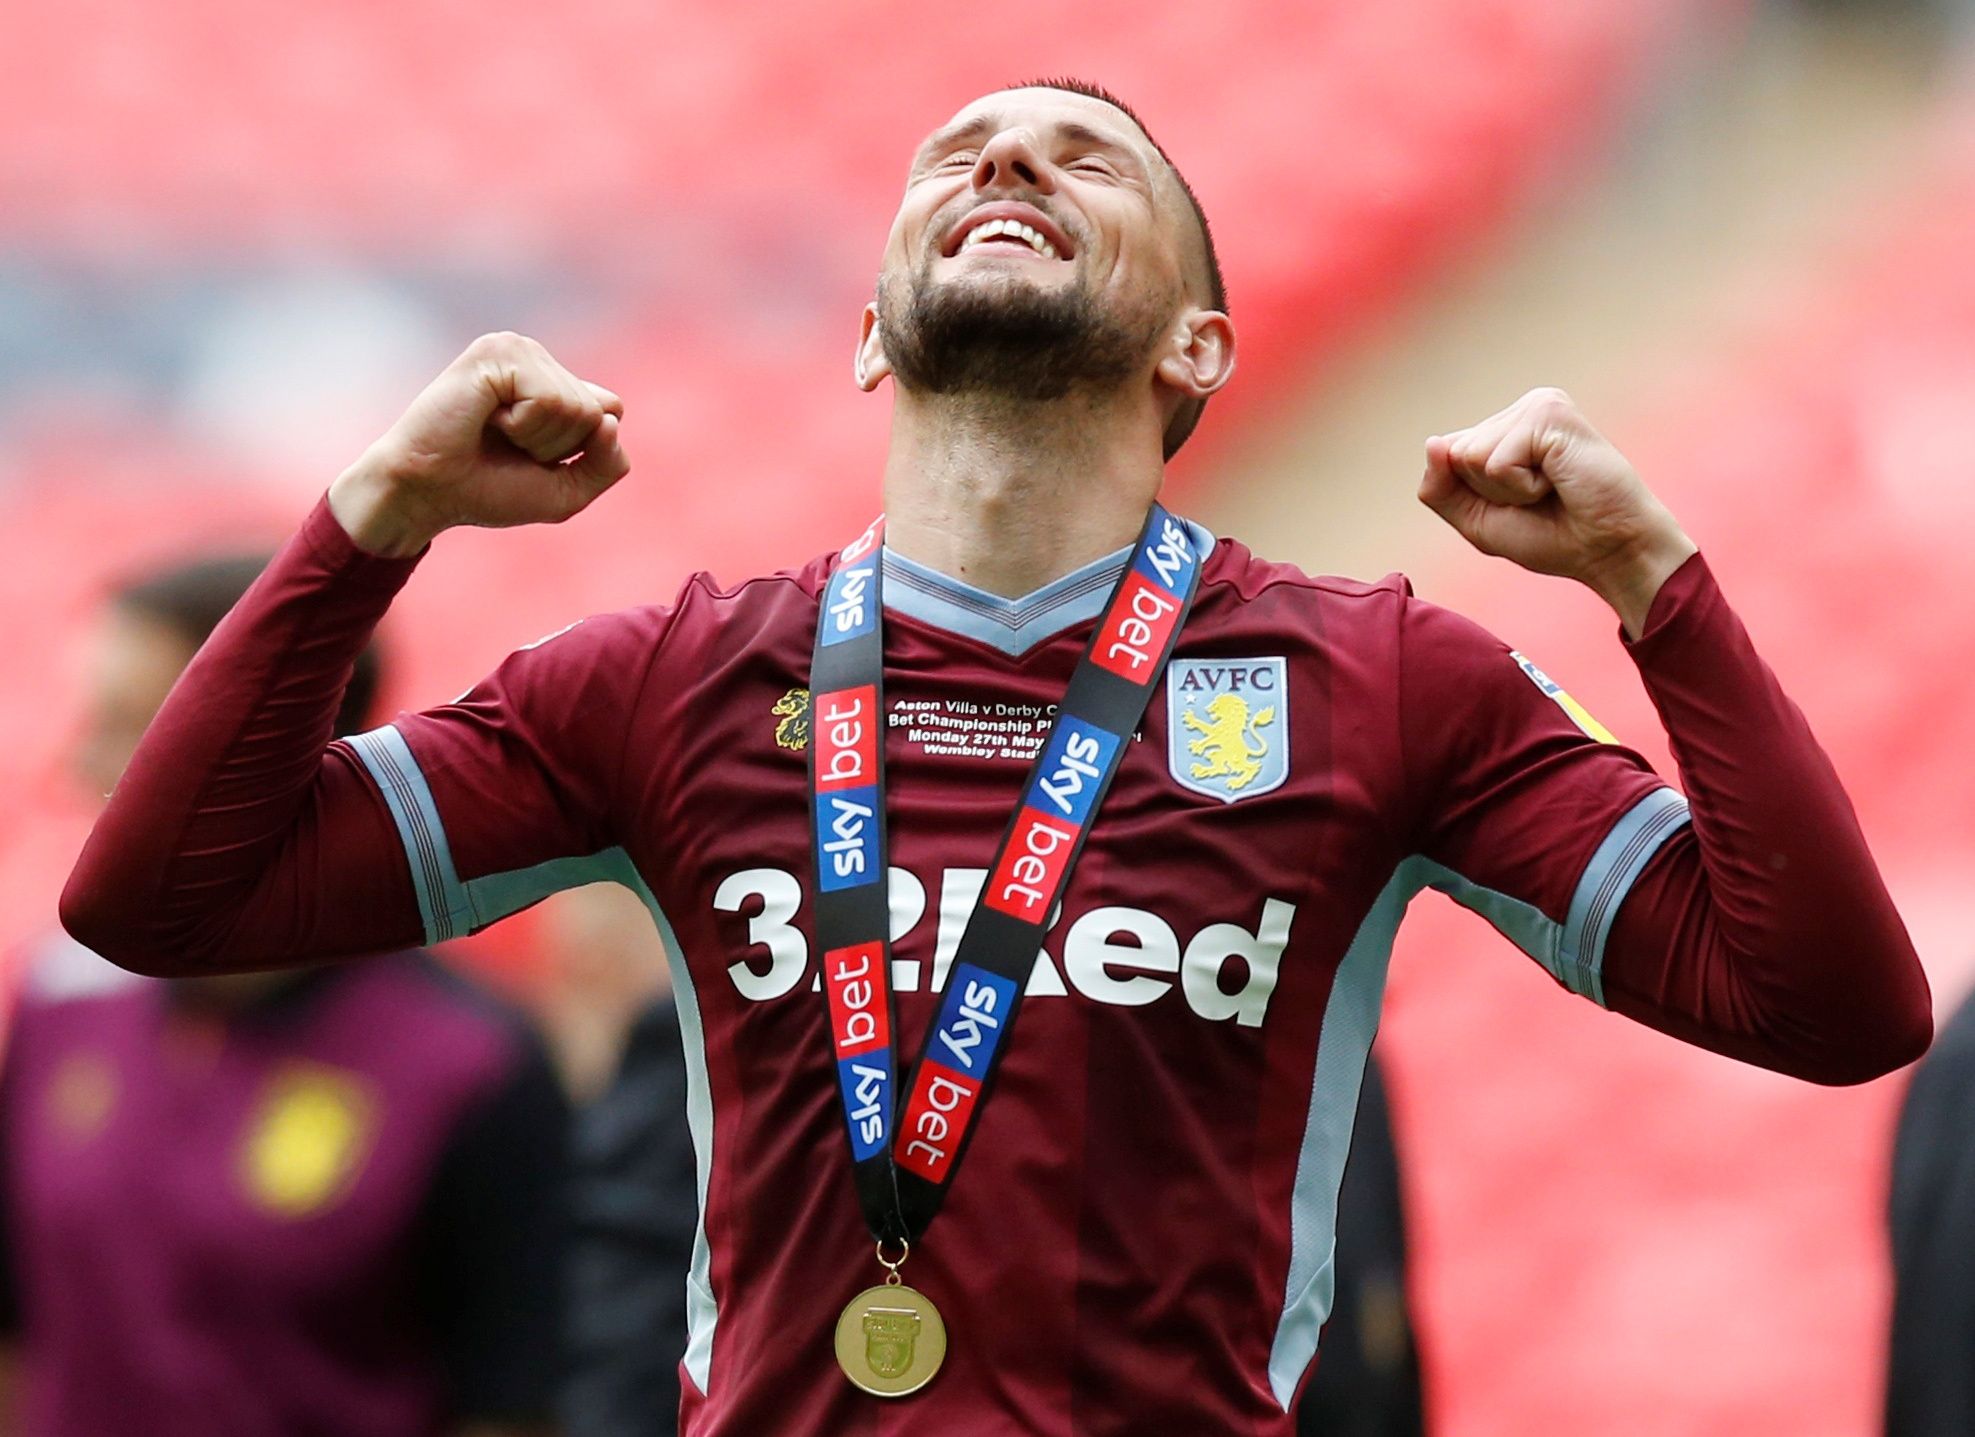 Soccer Football - Championship Playoff Final - Aston Villa v Derby County - Wembley Stadium, London, Britain - May 27, 2019  Aston Villa's Conor Hourihane celebrates after winning the playoffs  Action Images via Reuters/Ed Sykes